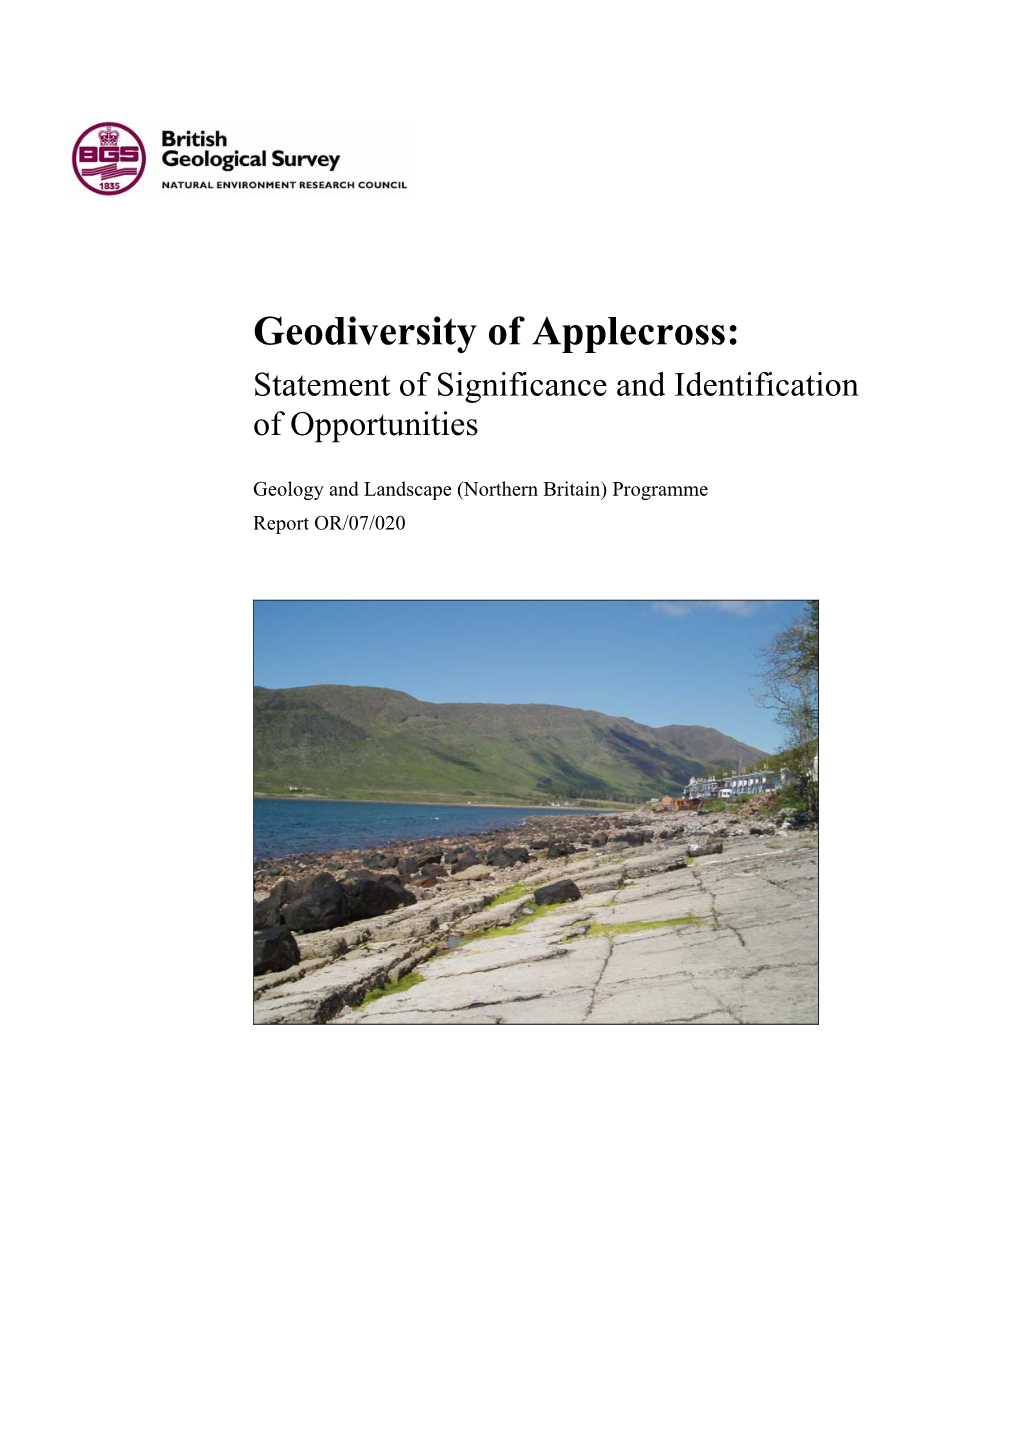 Geodiversity of Applecross: Statement of Significance and Identification of Opportunities